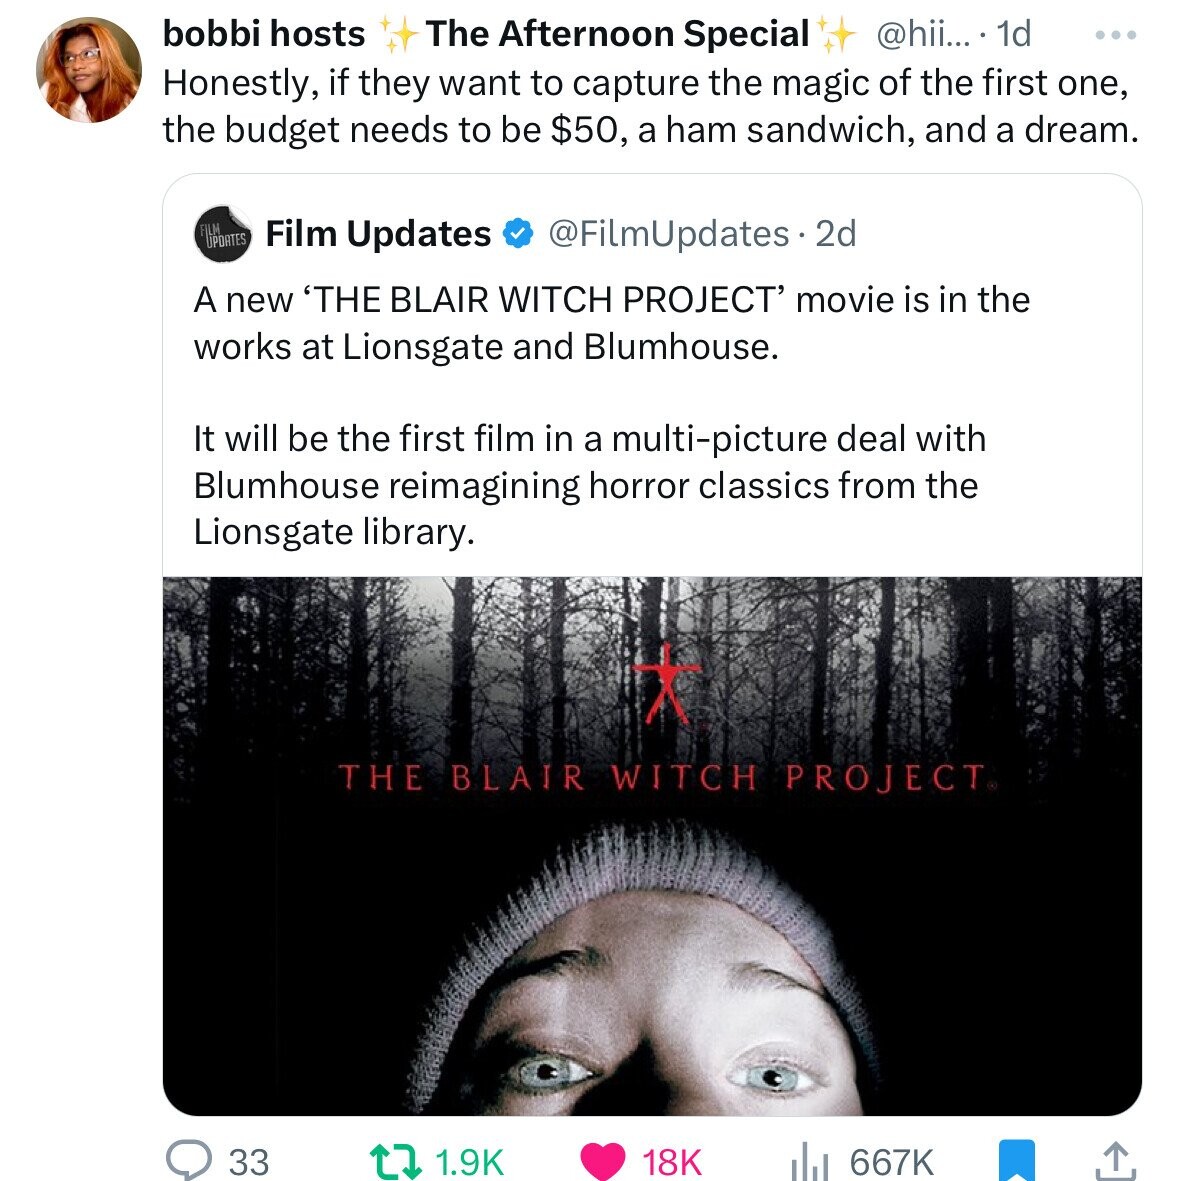 bobbi hosts The Afternoon Special @hii... . 1d ... Honestly, if they want to capture the magic of the first one, the budget needs to be $50, a ham sandwich, and a dream. FILM UPDATES Film Updates @FilmUpdates 2d A new 'THE BLAIR WITCH PROJECT' movie is in the works at Lionsgate and Blumhouse. It will be the first film in a multi-picture deal with Blumhouse reimagining horror classics from the Lionsgate library. THE BLAIR WITCH PROJECT® 33 18K 1.9K 667K 